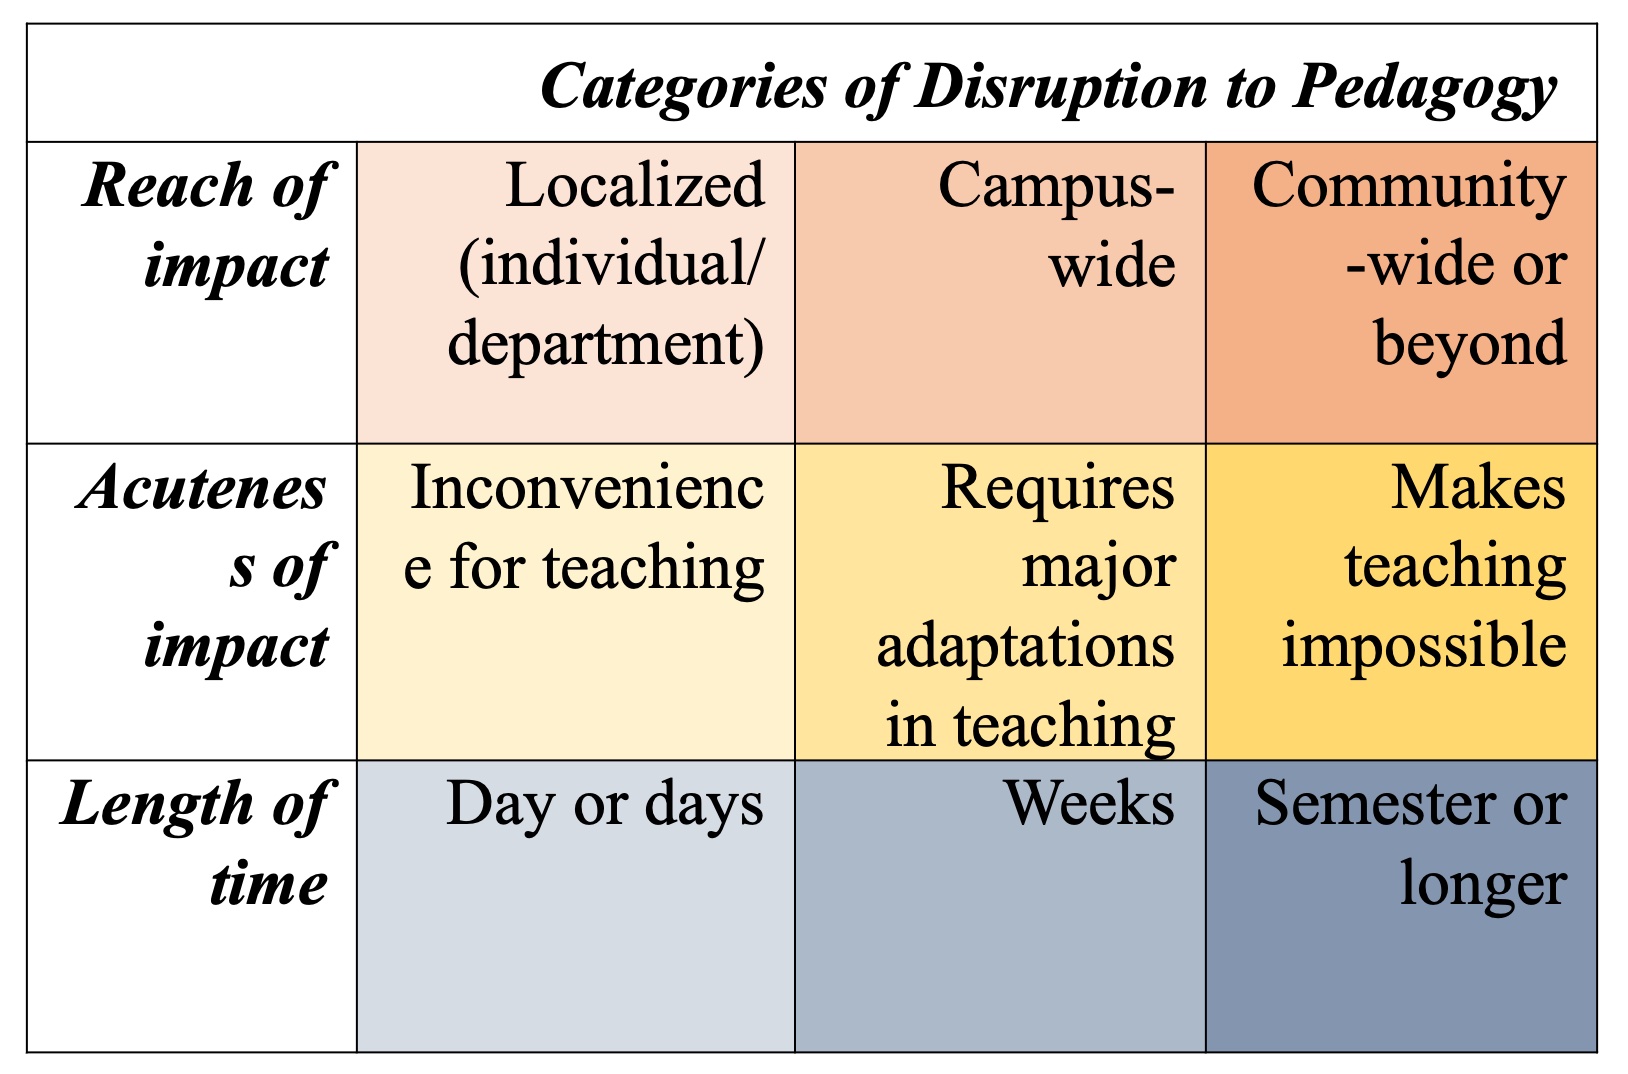 A table labeled Categories of Disruption to Pedagogy. Three rows are labeled from top to bottom: Reach of Impact, Acuteness of Impact, and Length of Time. The table has three columns which include descriptions for each row, left to right. Reach of impact row: Localized (individual/department), Campus-wide, and Community-wide or Beyond. Acuteness of Impact row: Inconvenience for Teaching, Requires major Adaptations in Teaching, and Makes Teaching Impossible. The last row, Length of Time: Day or Days, Weeks, and Semester or Longer.